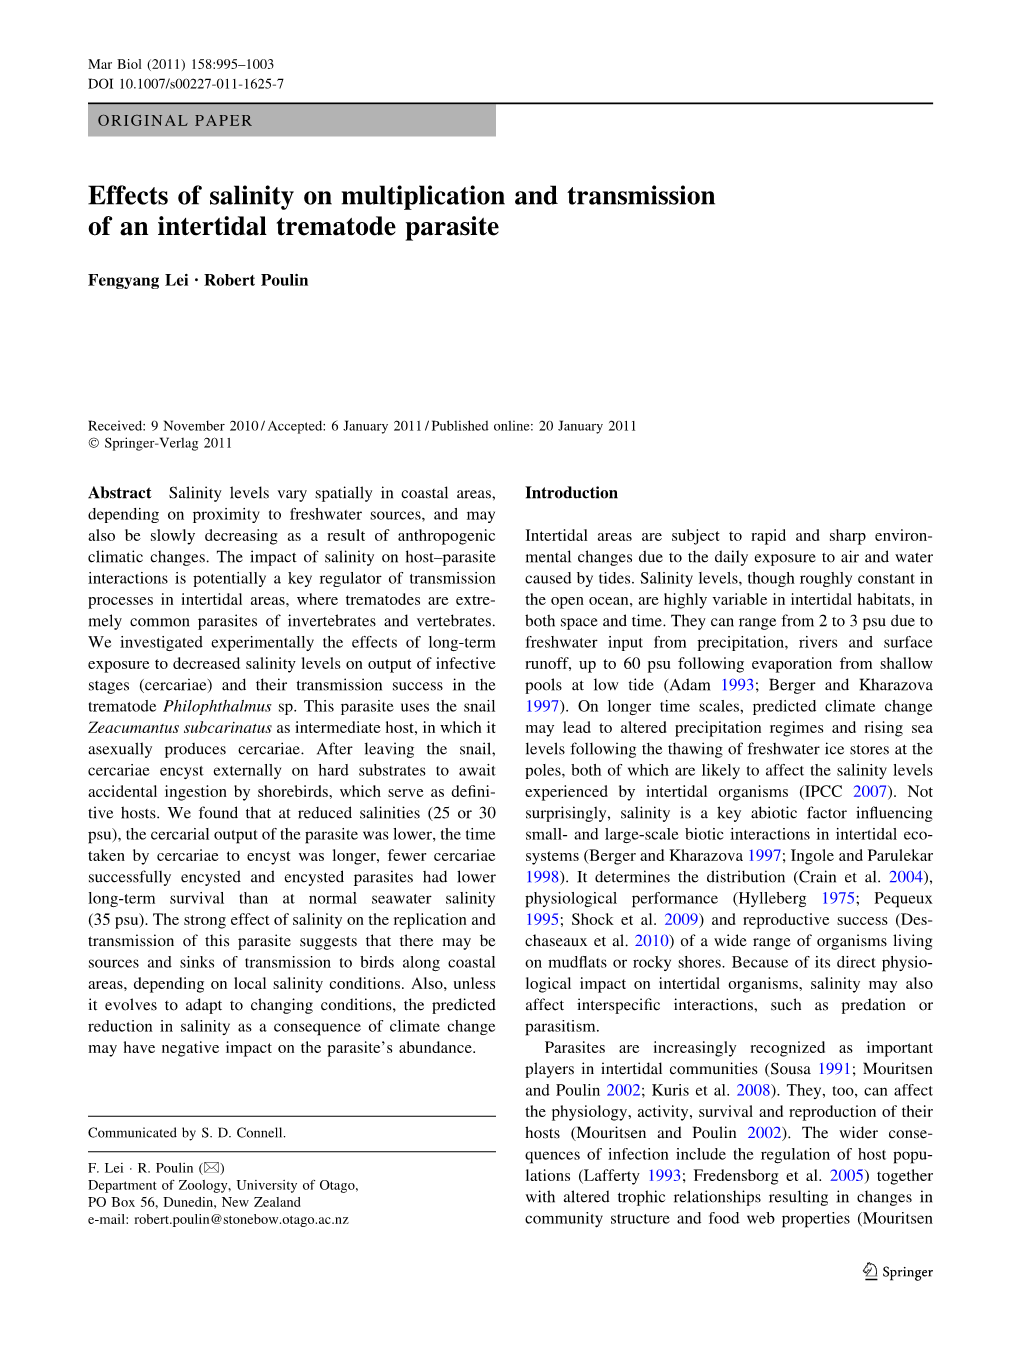 Effects of Salinity on Multiplication and Transmission of an Intertidal Trematode Parasite